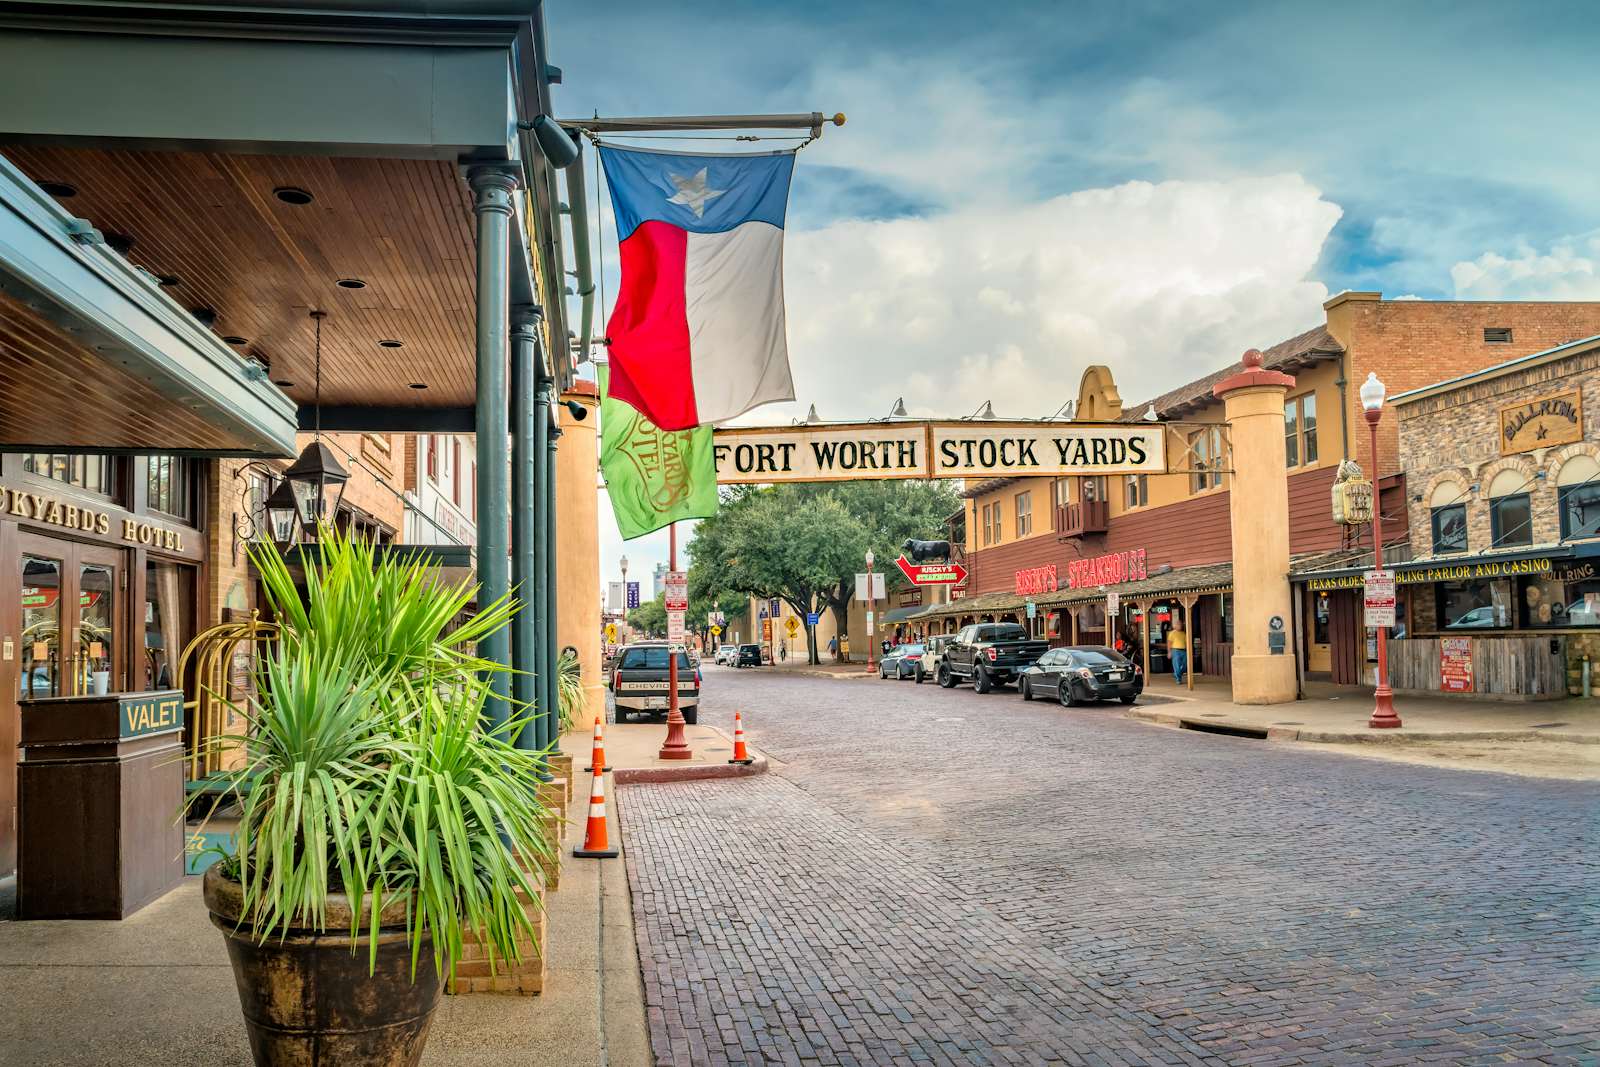 Street view of Fort Worth Stockyards in Texas